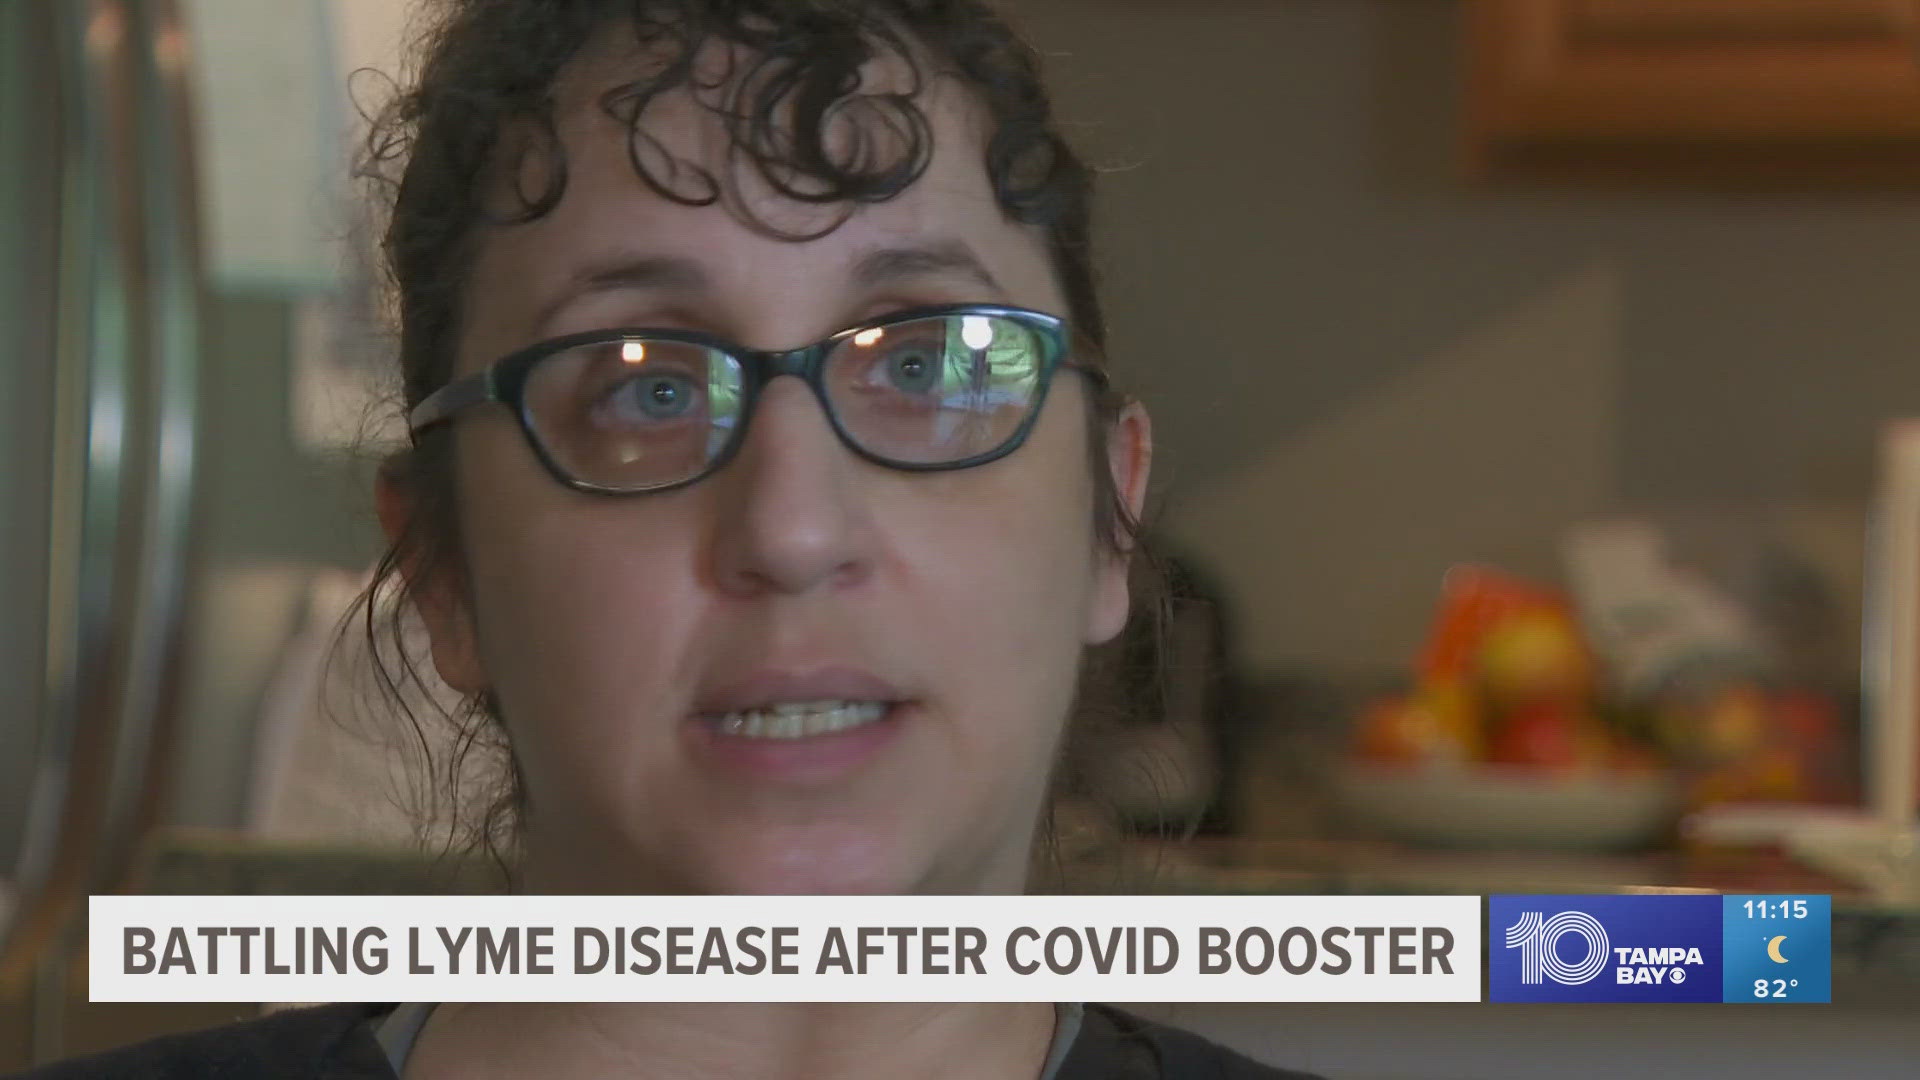 Tara Foti got a COVID-19 booster shot back in 2021. Now, she says it reactivated Lyme disease, with debilitating symptoms.